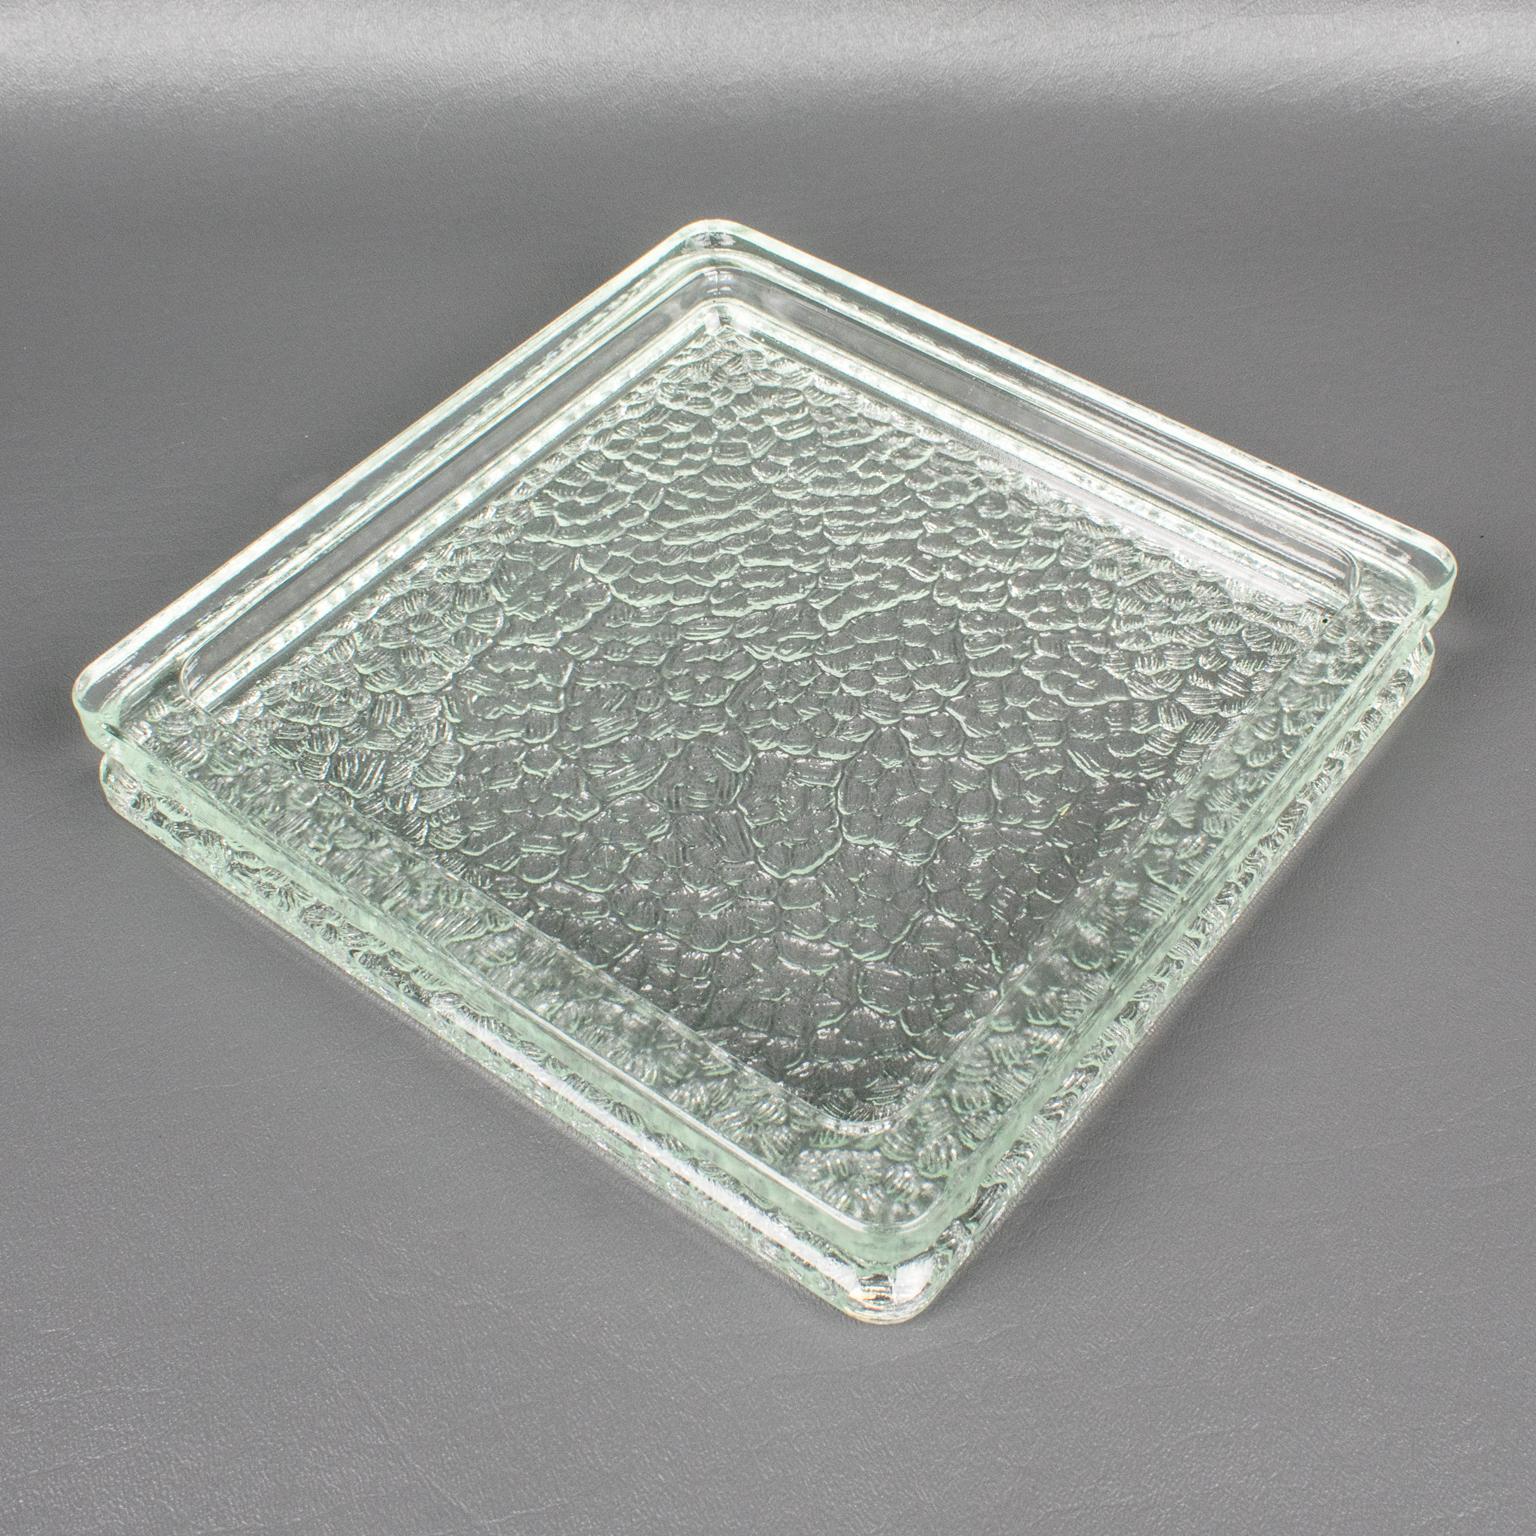 Mid-Century Modern Designed by Le Corbusier for Lumax 1950s Nevada Molded Glass Desk Tidy Ashtray For Sale